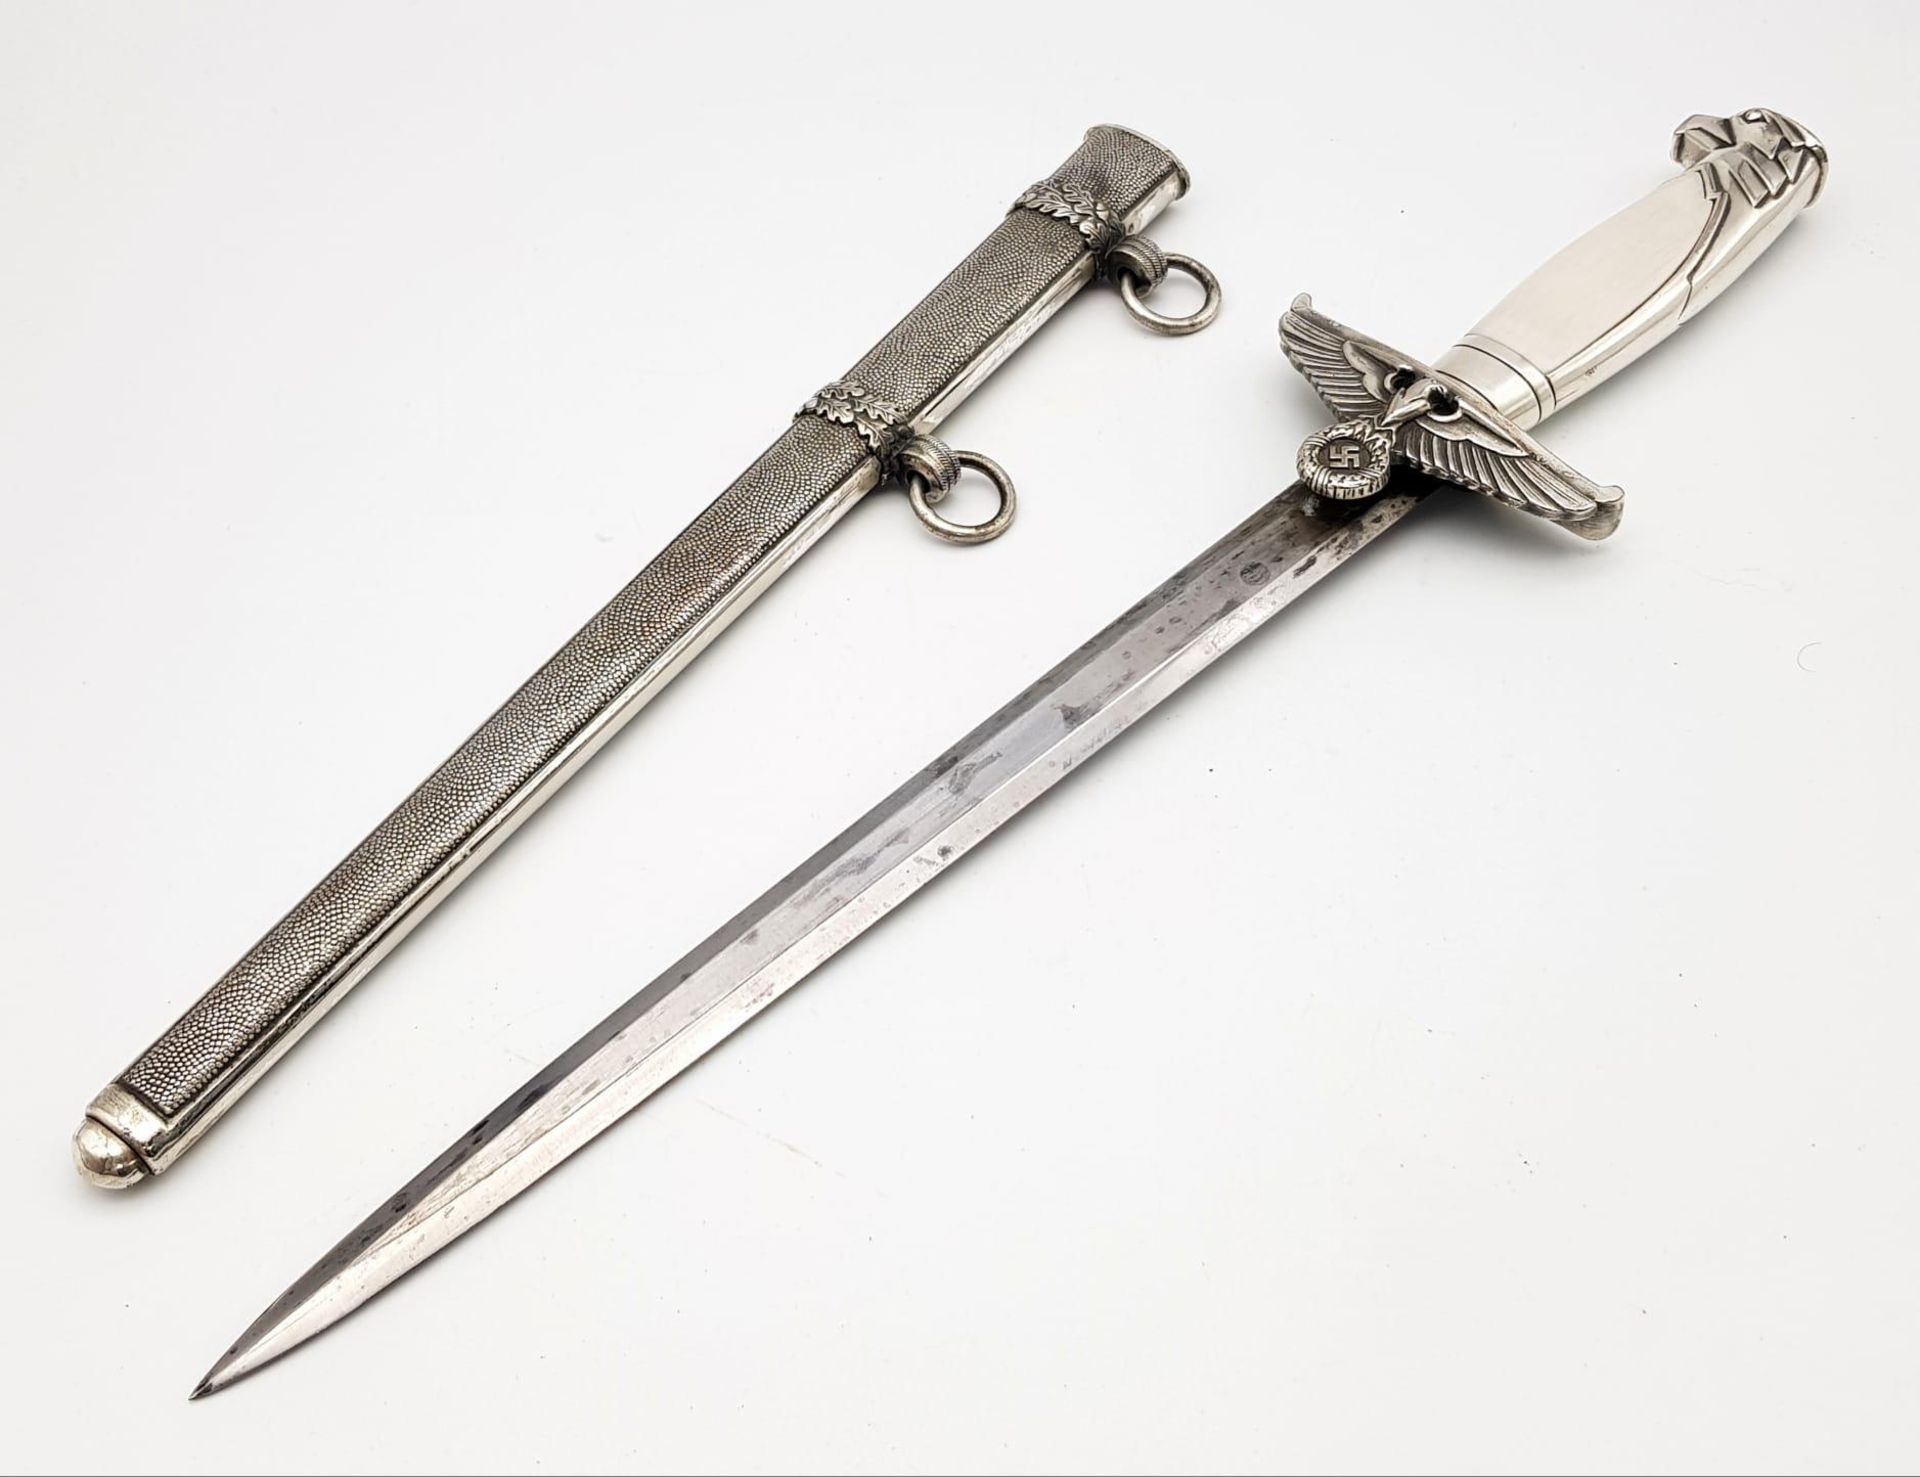 A WW2 German Diplomats Dagger - these stylish daggers had fake mother of pearl handles. This is a